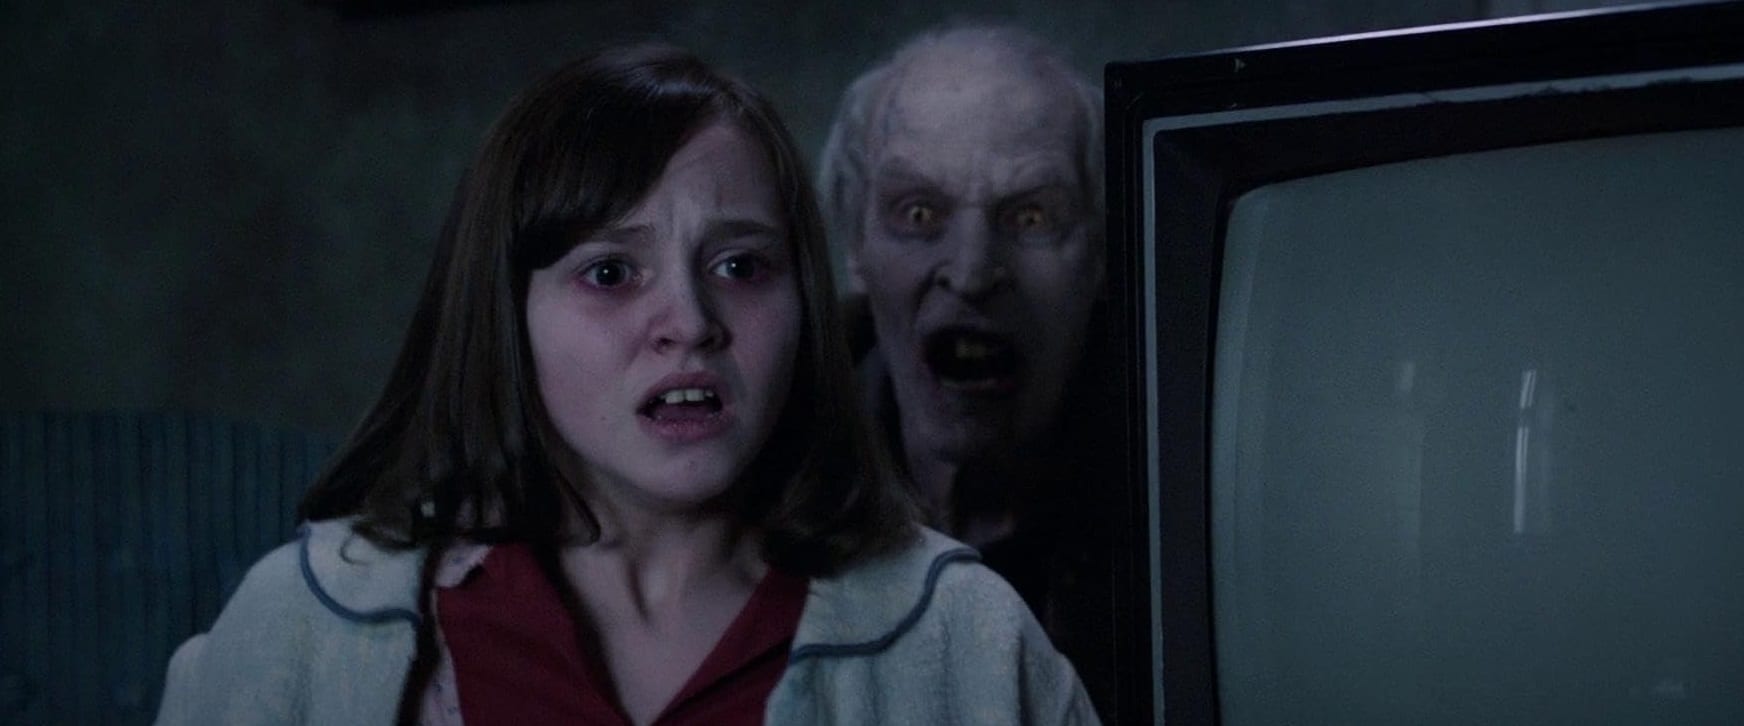 Bob Adrian and Madison Wolfe in The Conjuring 2 (2016)